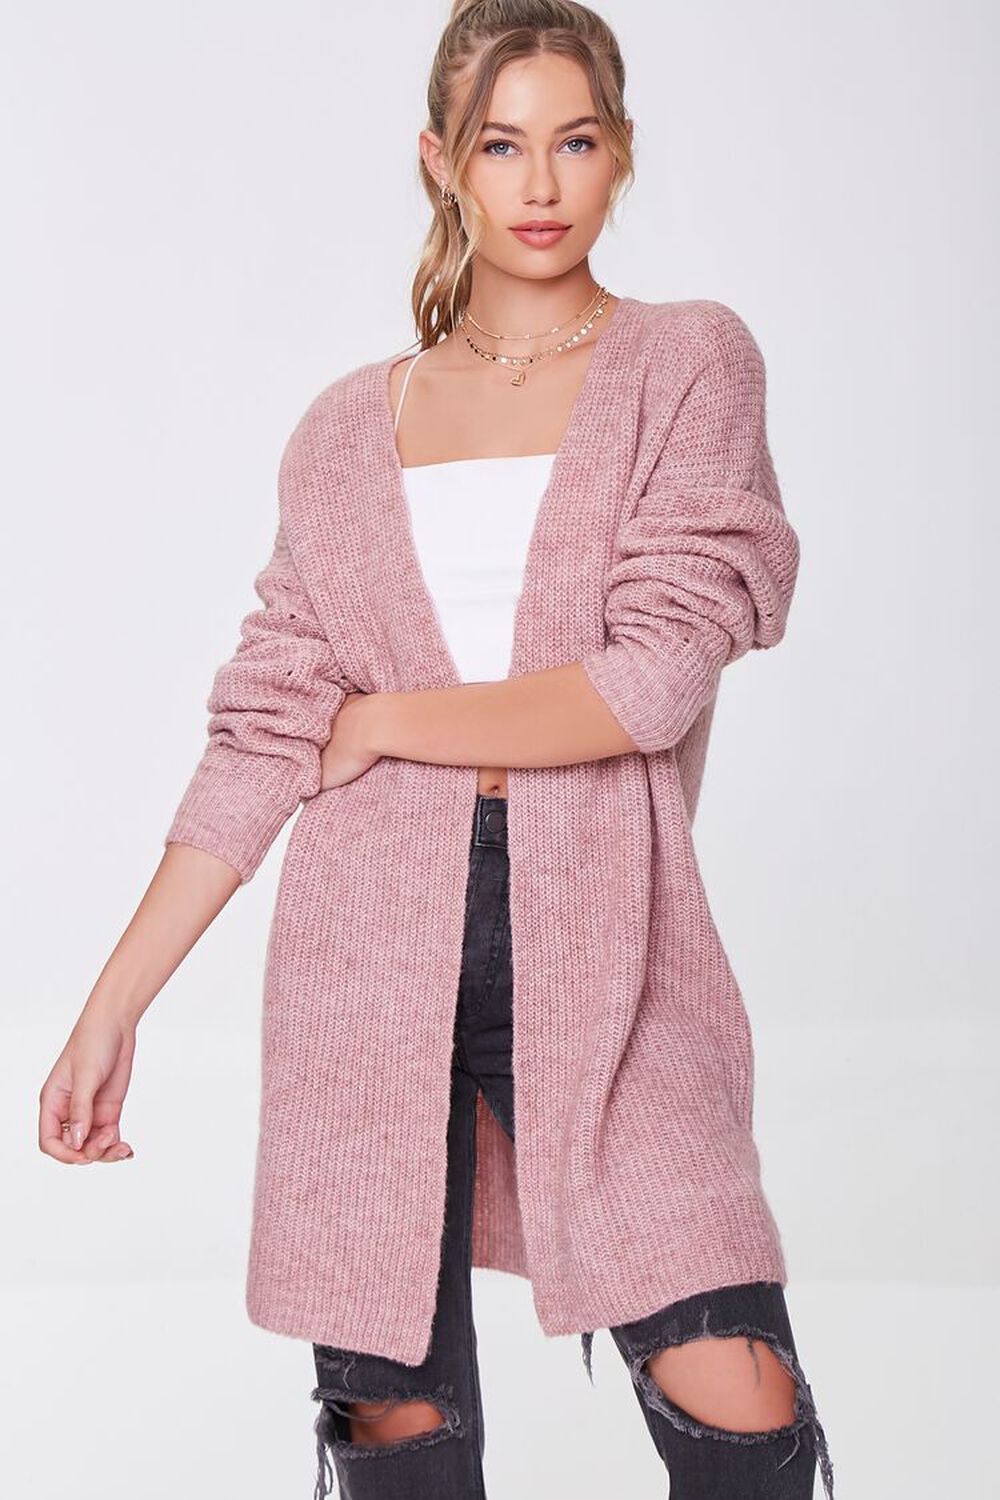 ROSE Marled Open-Front Cardigan Sweater, image 1